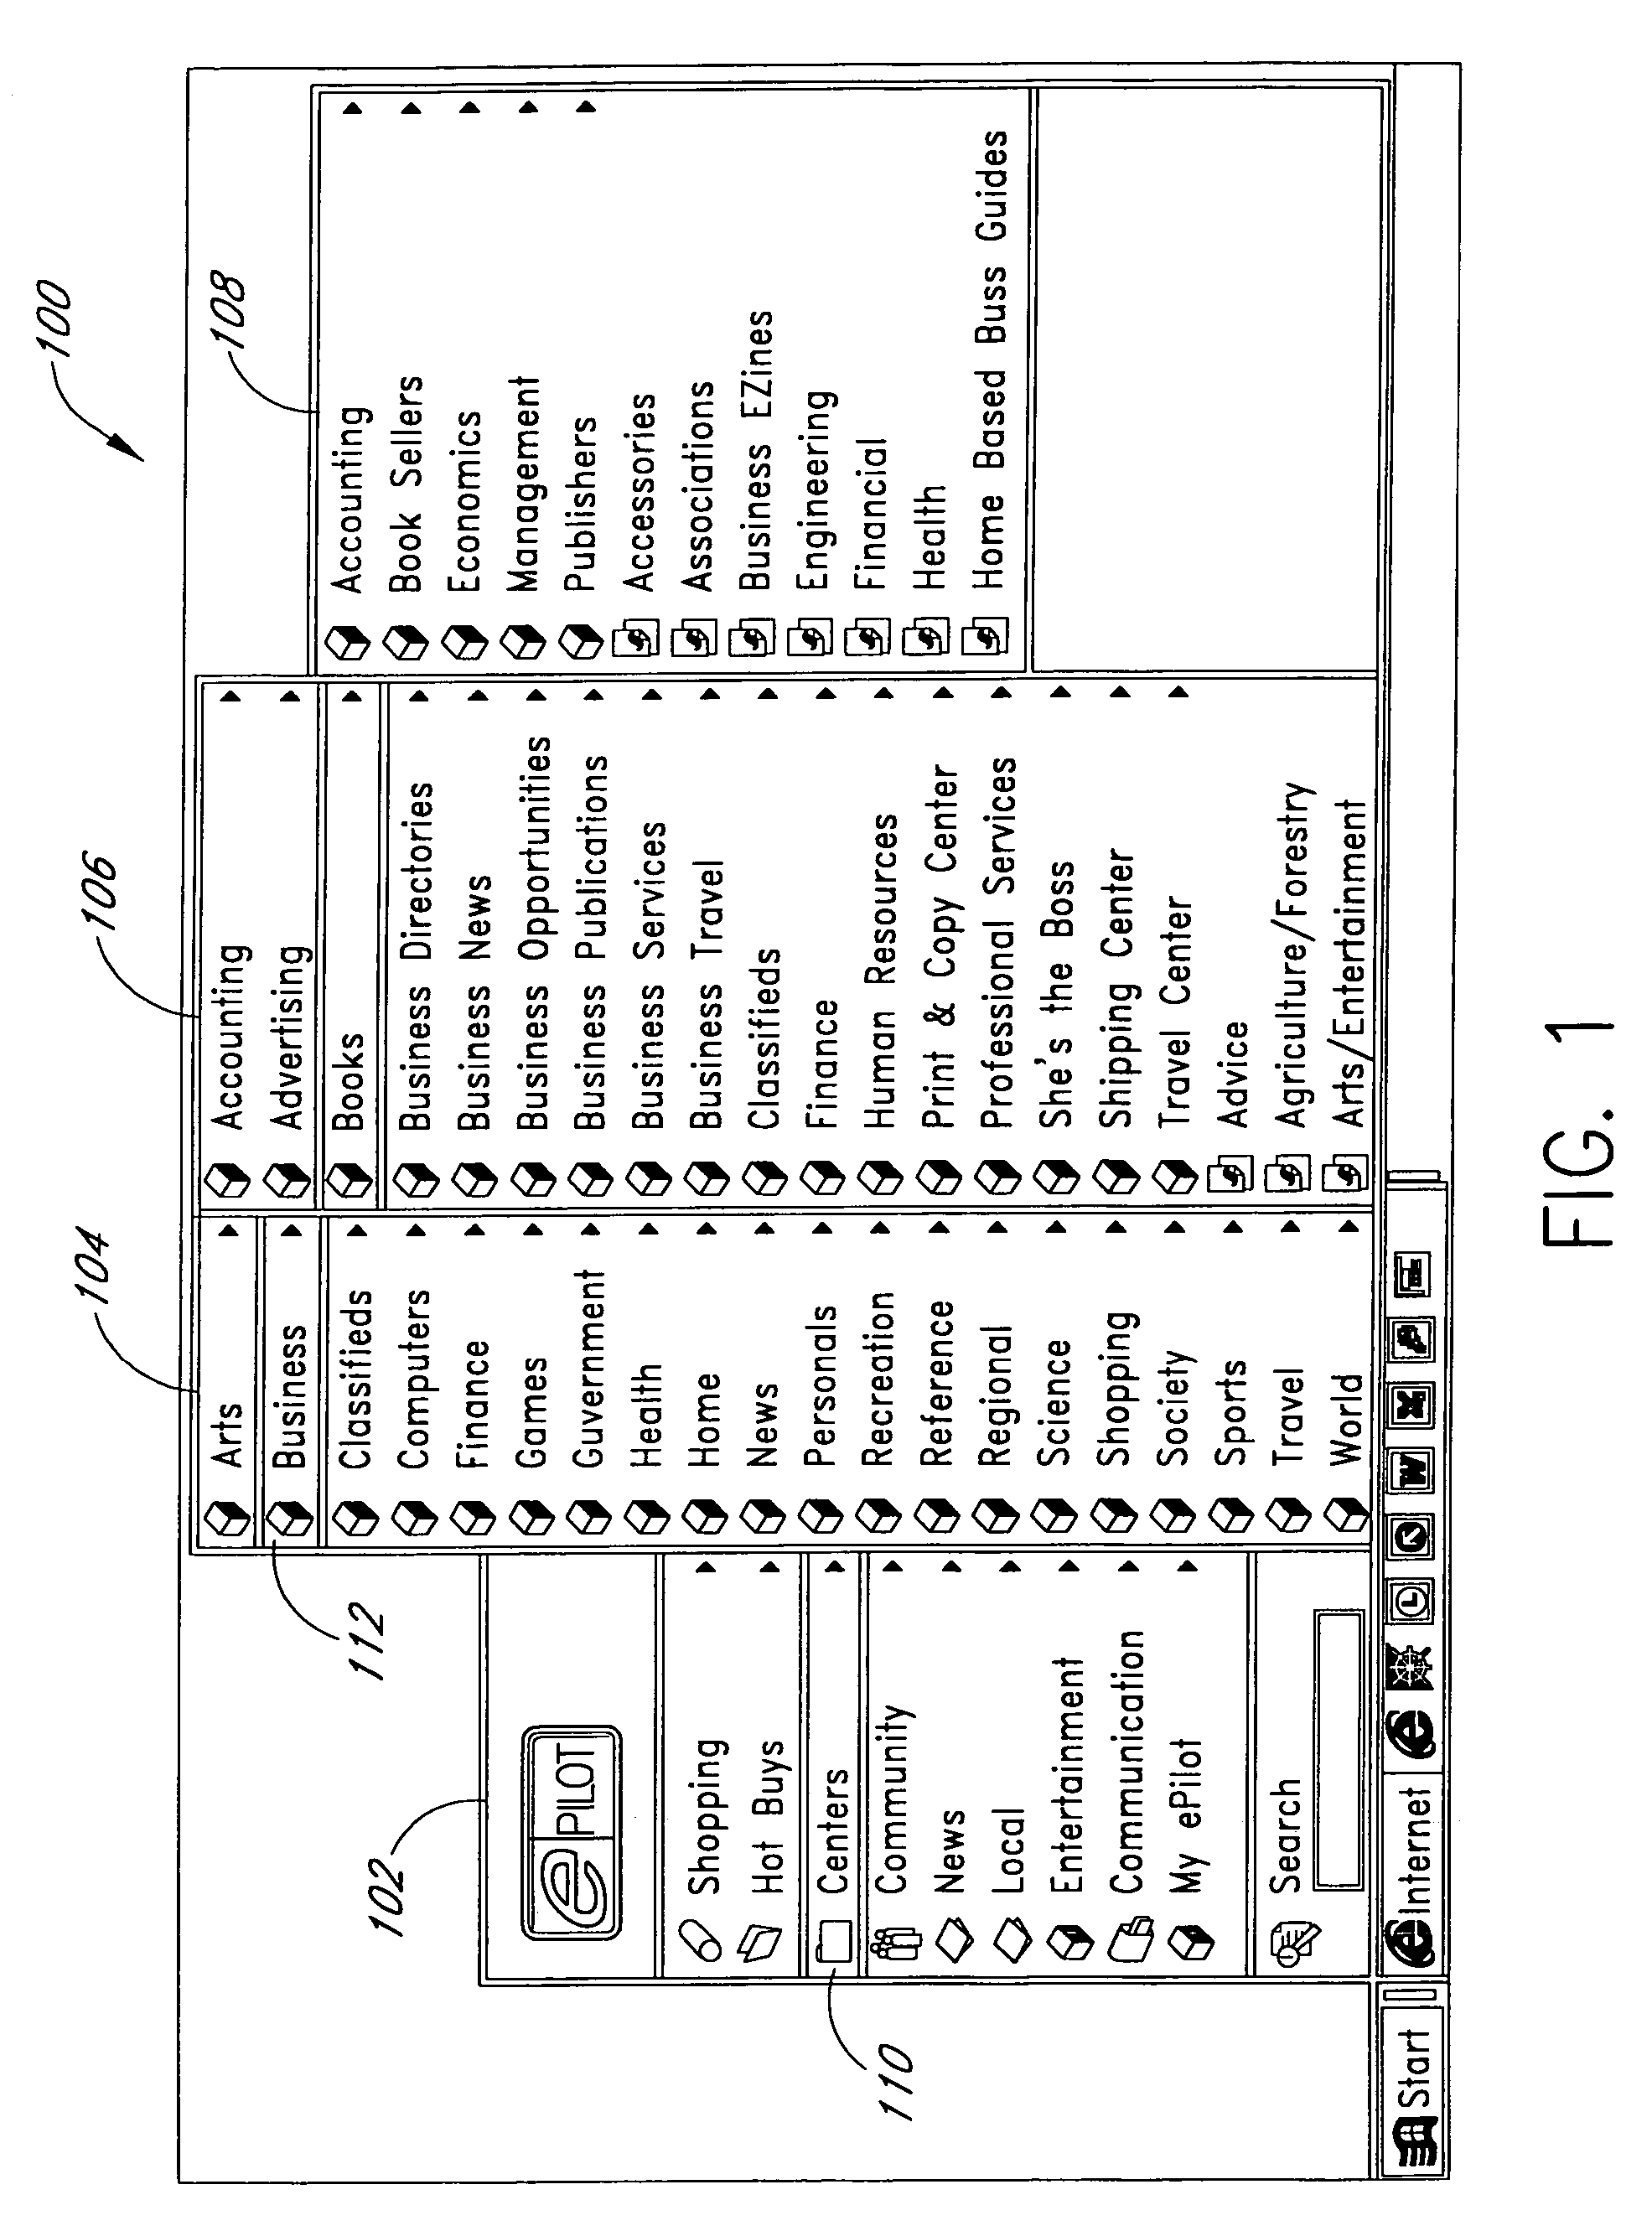 System and method for generating a search query using a category menu